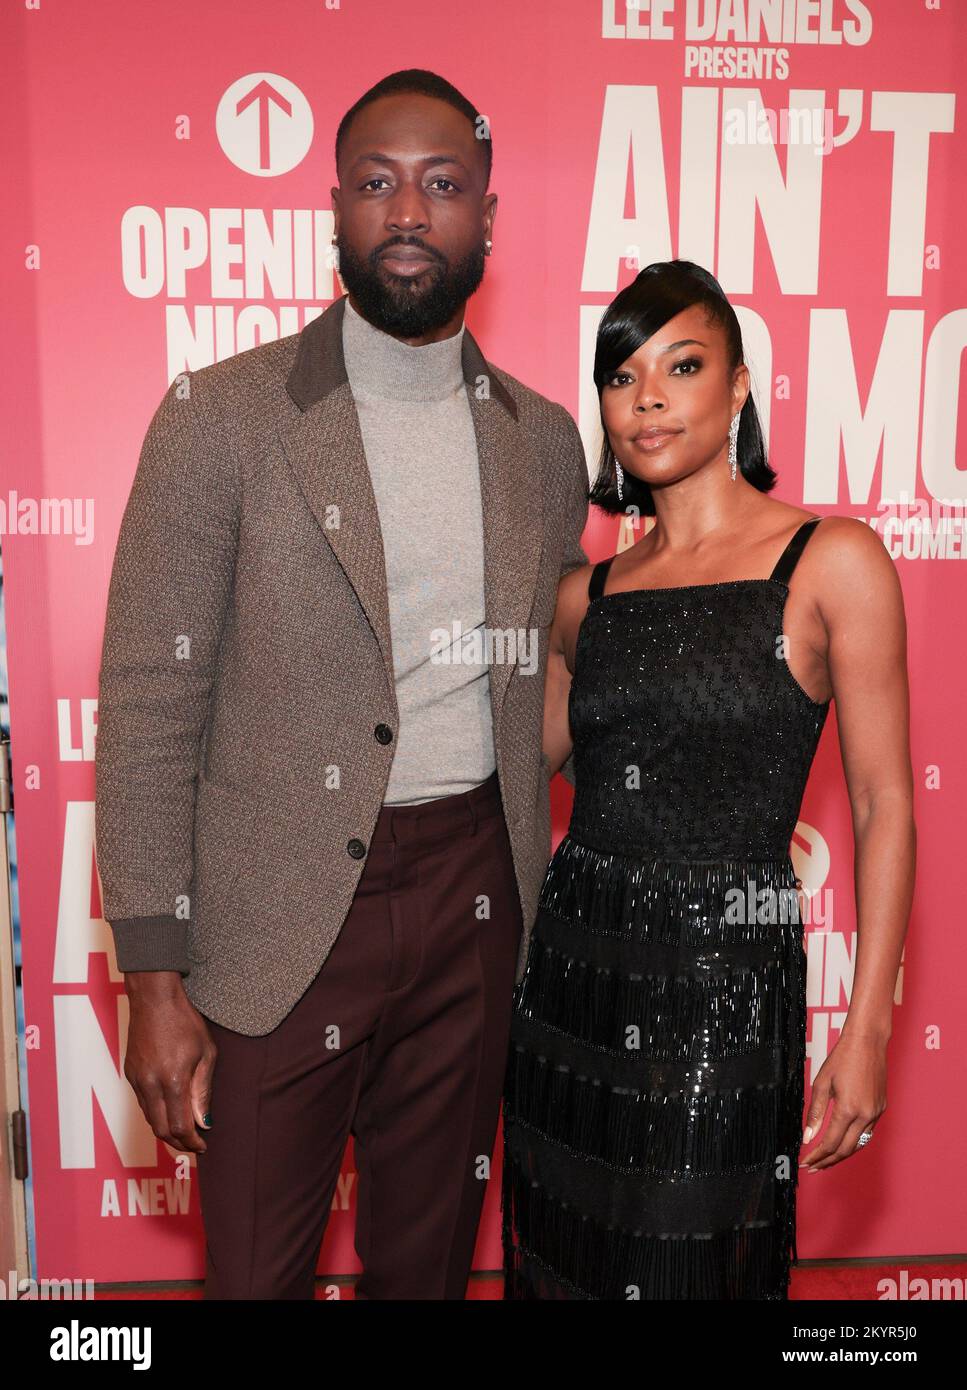 New York, NY, USA. 1st Dec, 2022. Dwayne Wade, Gabrielle Union at arrivals for AIN'T NO MO' Opening Night on Broadway, Belasco Theatre, New York, NY December 1, 2022. Credit: CJ Rivera/Everett Collection/Alamy Live News Stock Photo